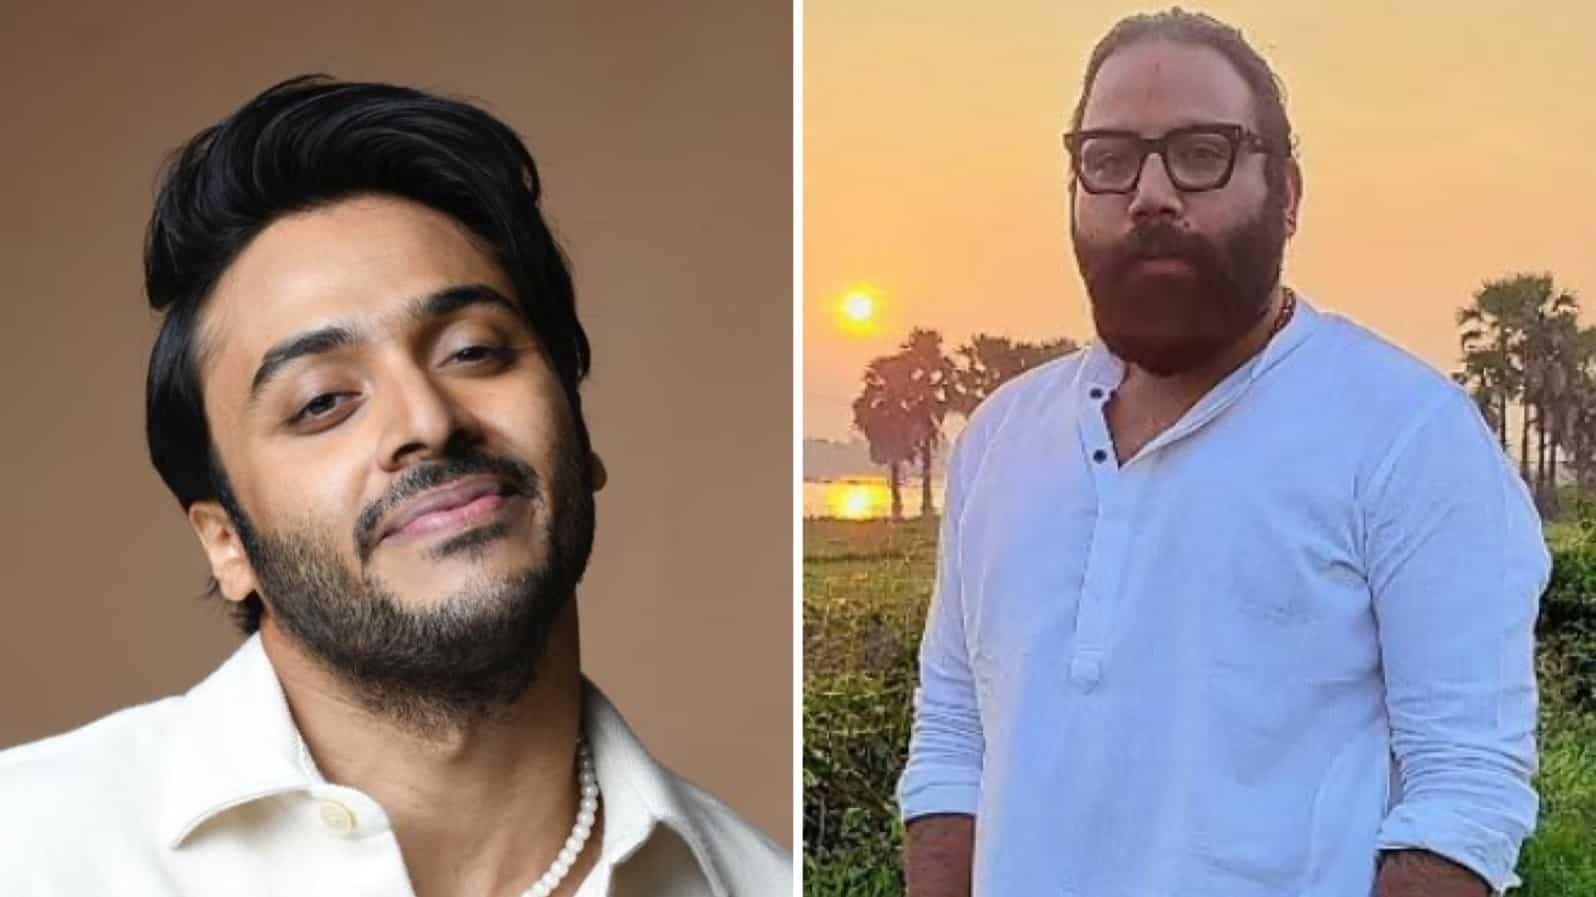 https://www.mobilemasala.com/movies/Exclusive-Soham-Majumder-on-Sandeep-Reddy-Vanga-He-is-launching-the-trailer-of-Dukaan-and-its-a-great-encouragement-for-me-i218782